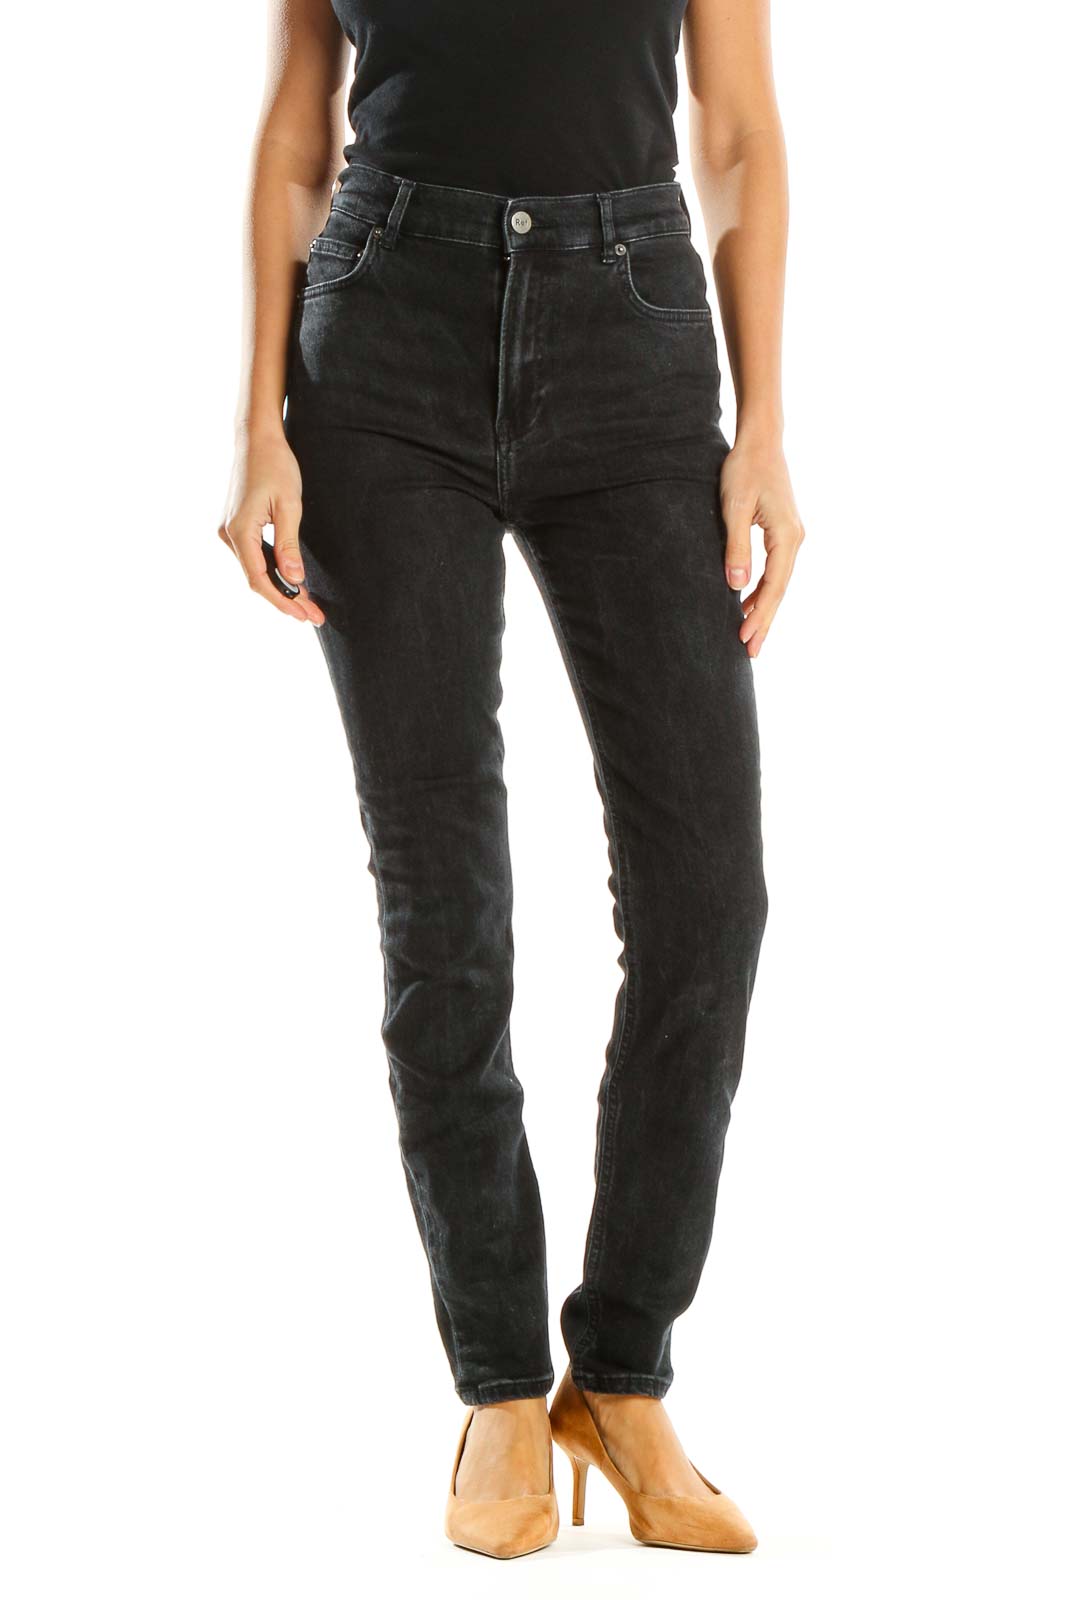 Black High-Waisted Skinny Jeans Front